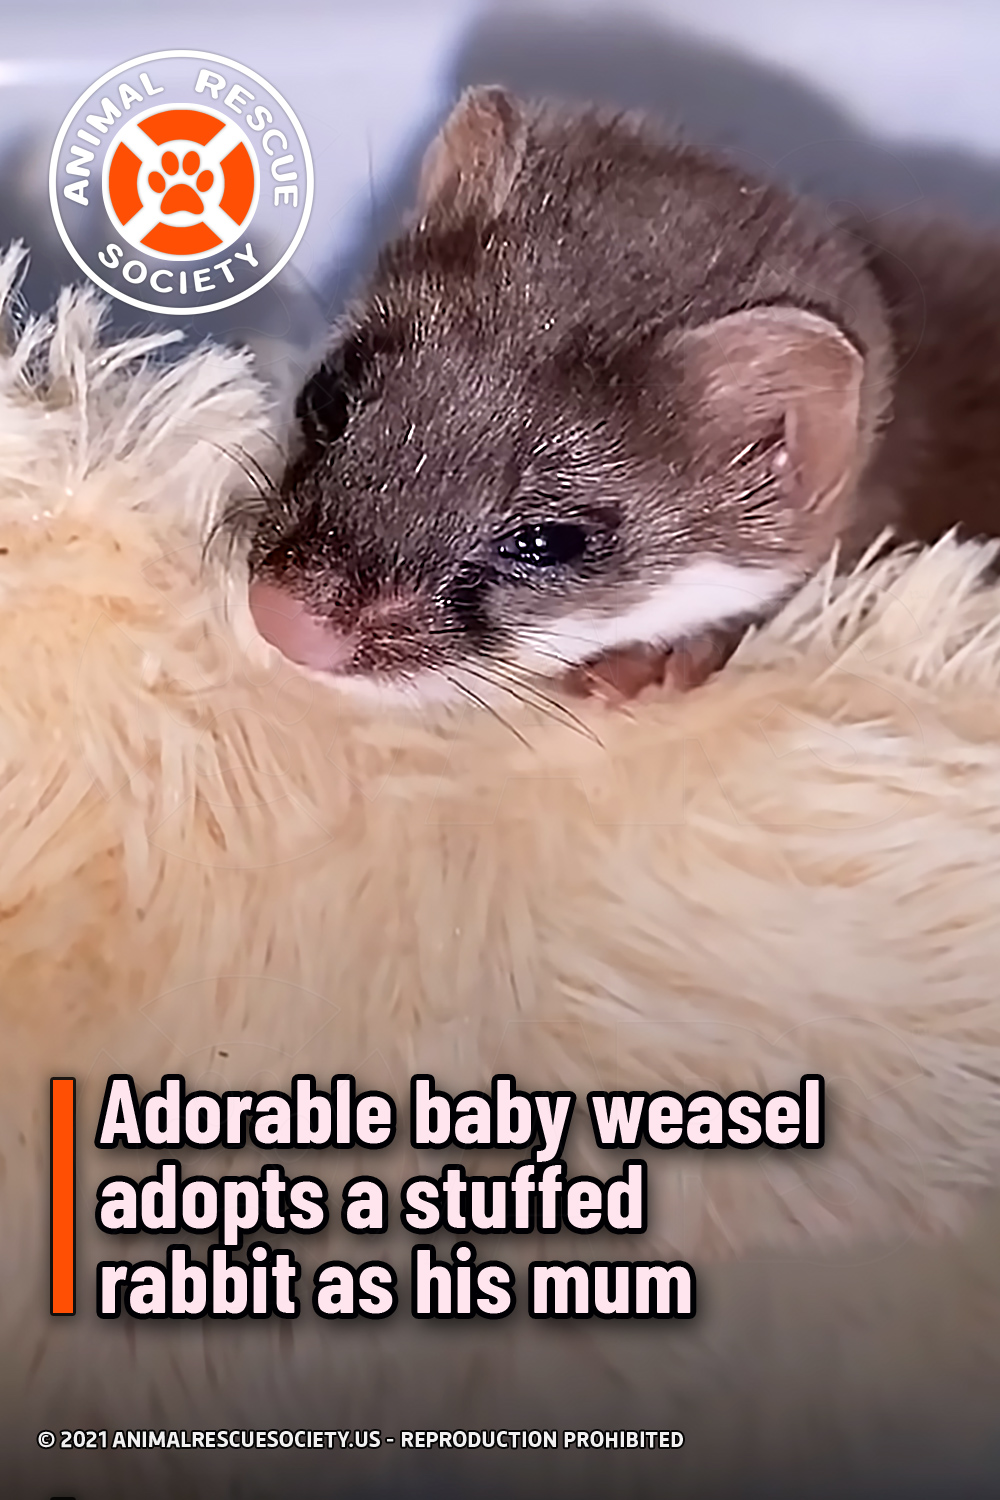 Adorable baby weasel adopts a stuffed rabbit as his mum